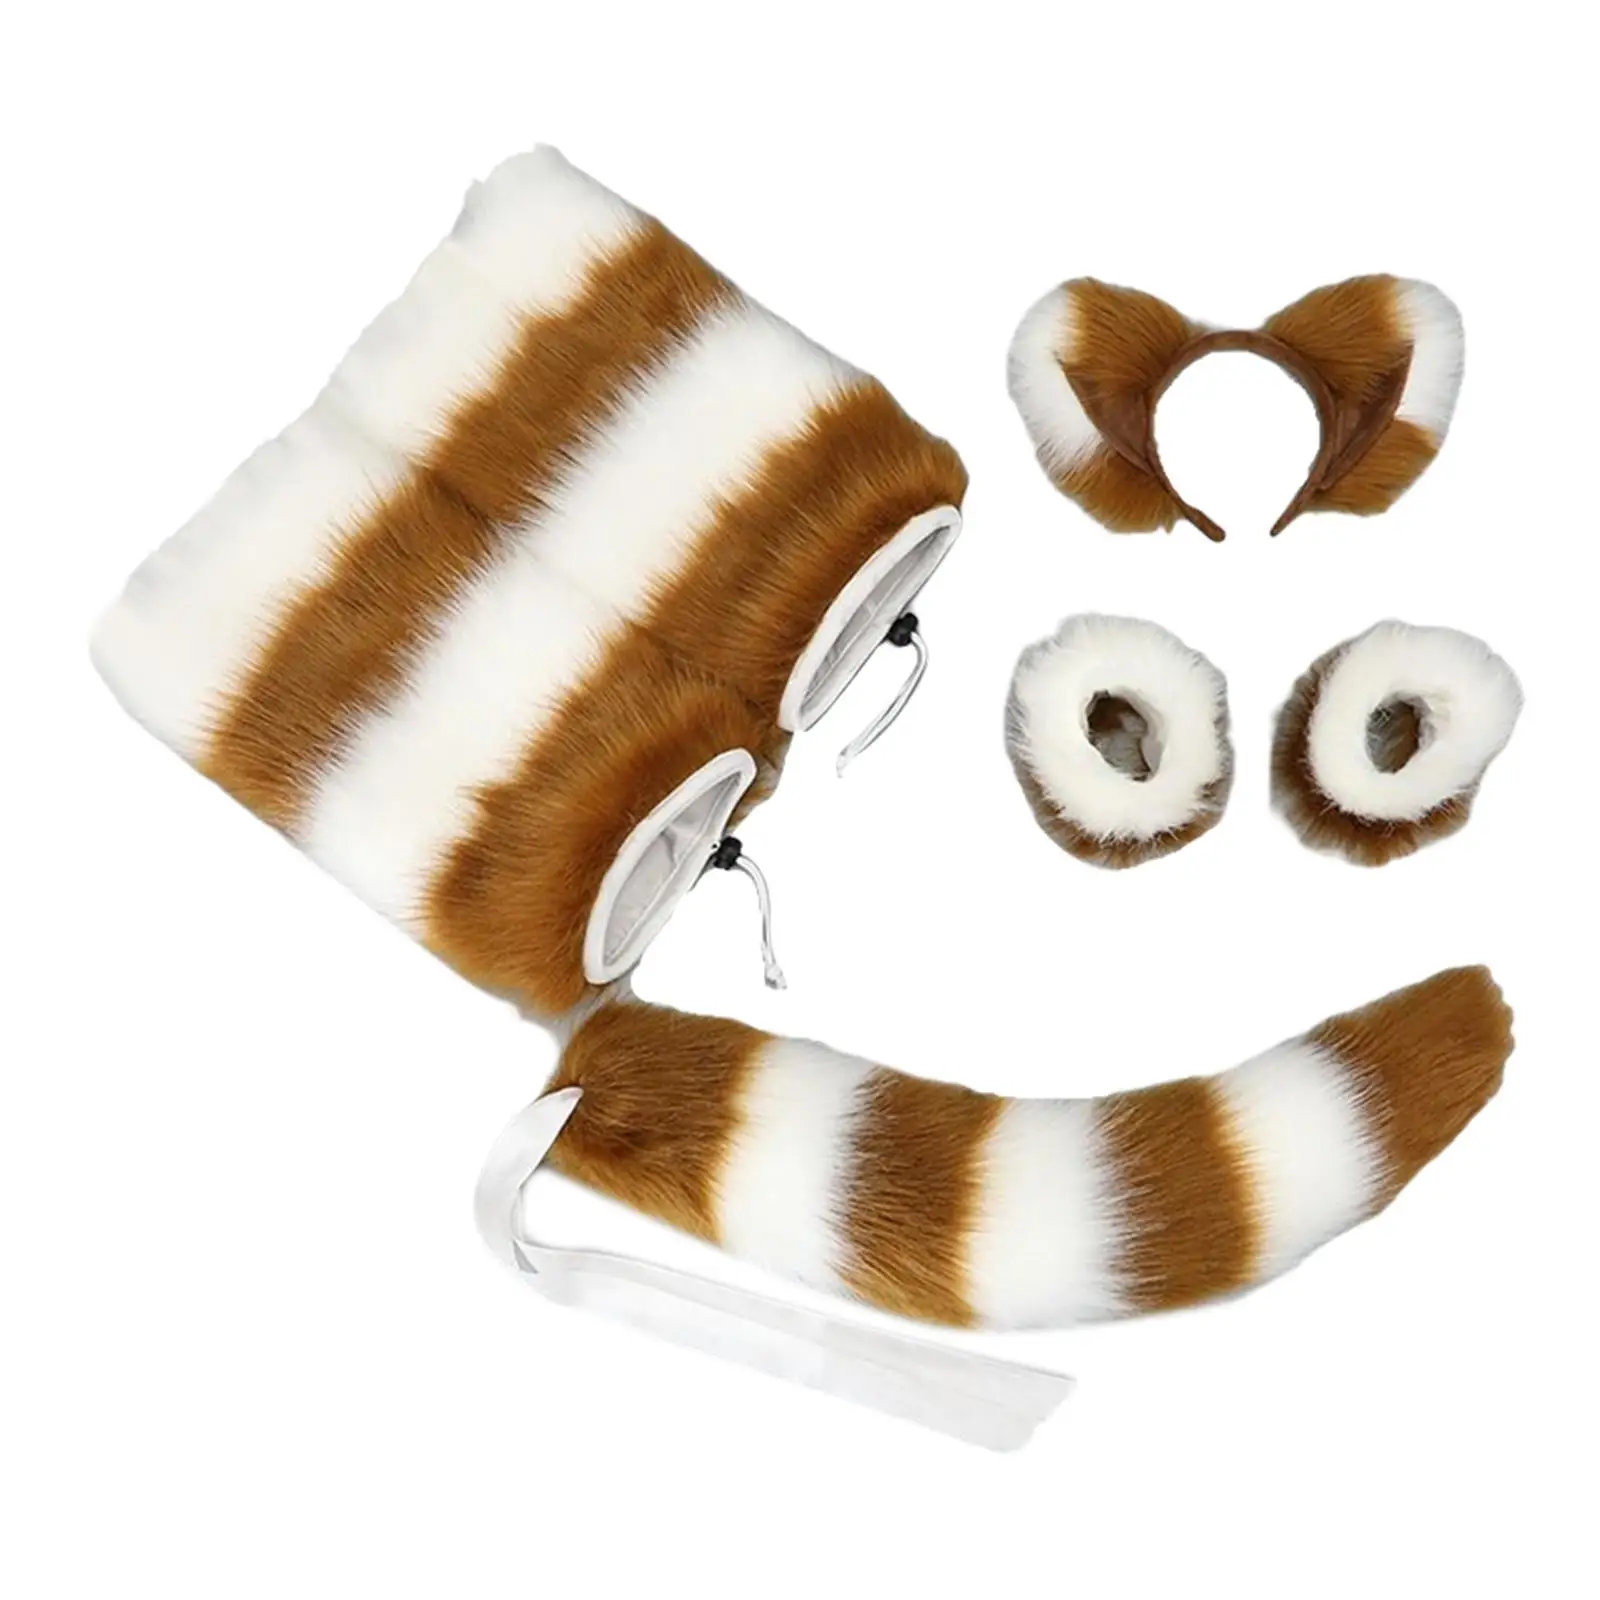 Faux Ears Tail Cosplay Set Headwear Animal Wristband for Costume Dress up Adults